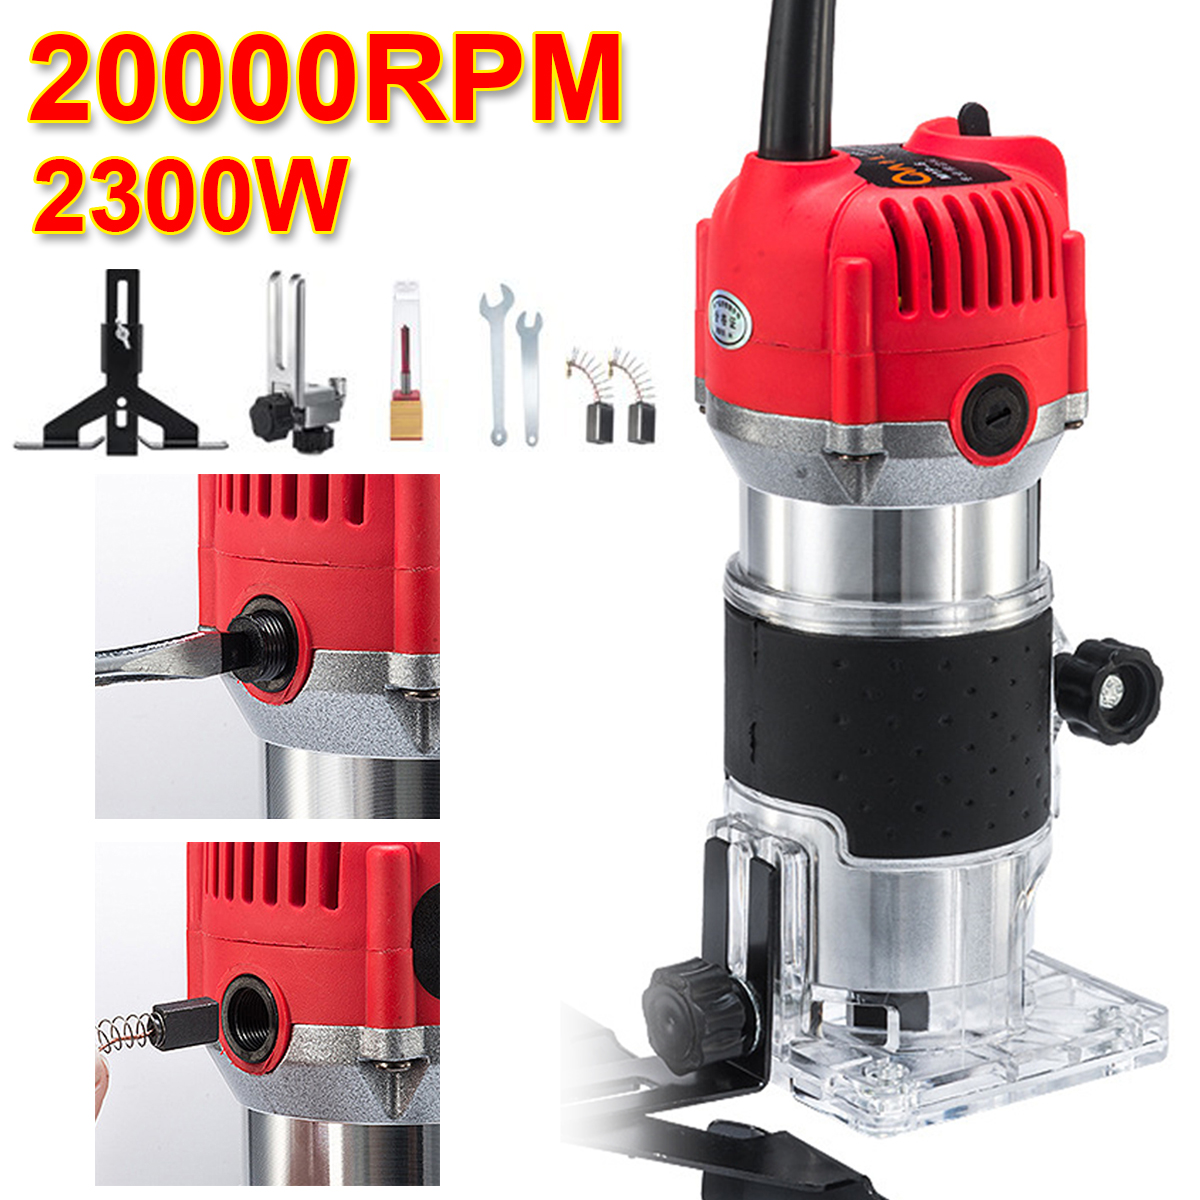 110V220V-20000rpm-Electric-Hand-Trimmer-Router-Wood-Laminate-Palm-Joiners-Working-Cutting-Tool-1821827-2